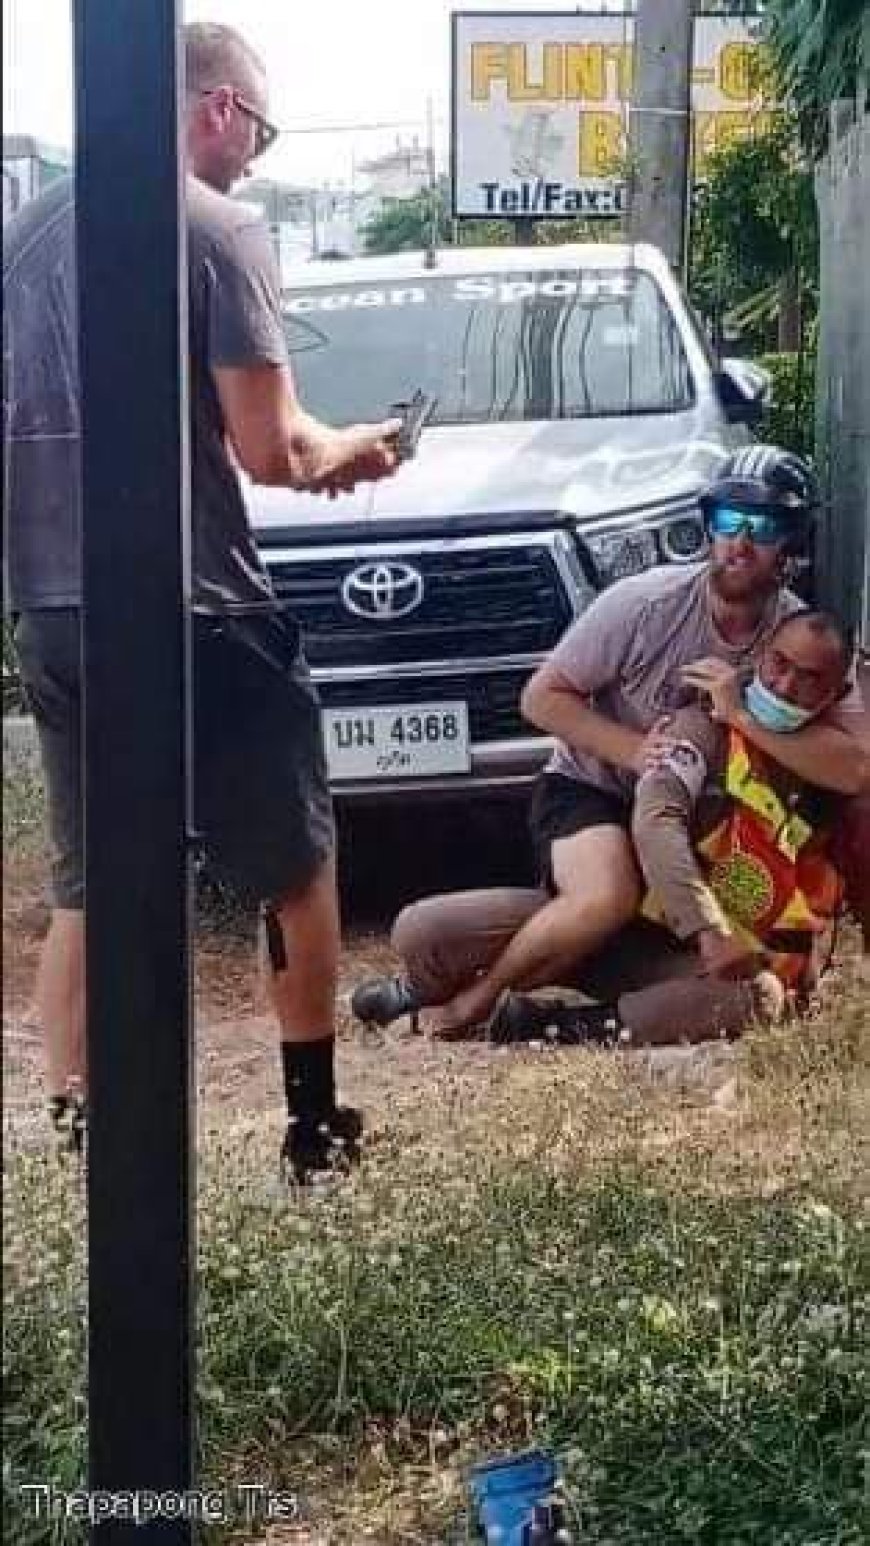 Phuket, Chalong Police Station, tourists...arrogant  Stealing a gun and attacking a police officer